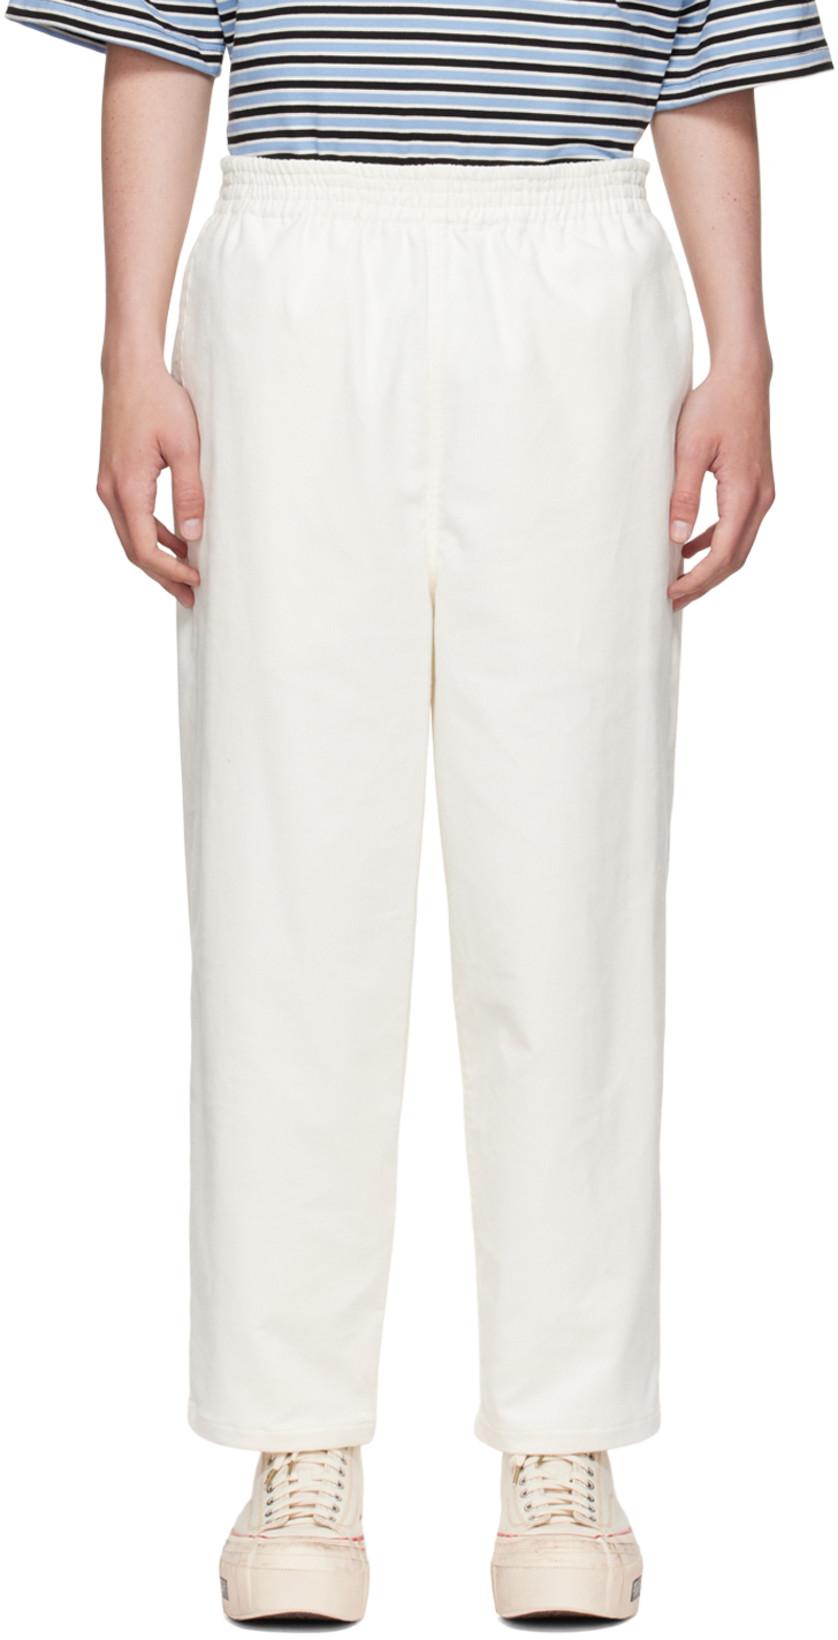 Off-White Cotton Trousers by CAMIEL FORTGENS